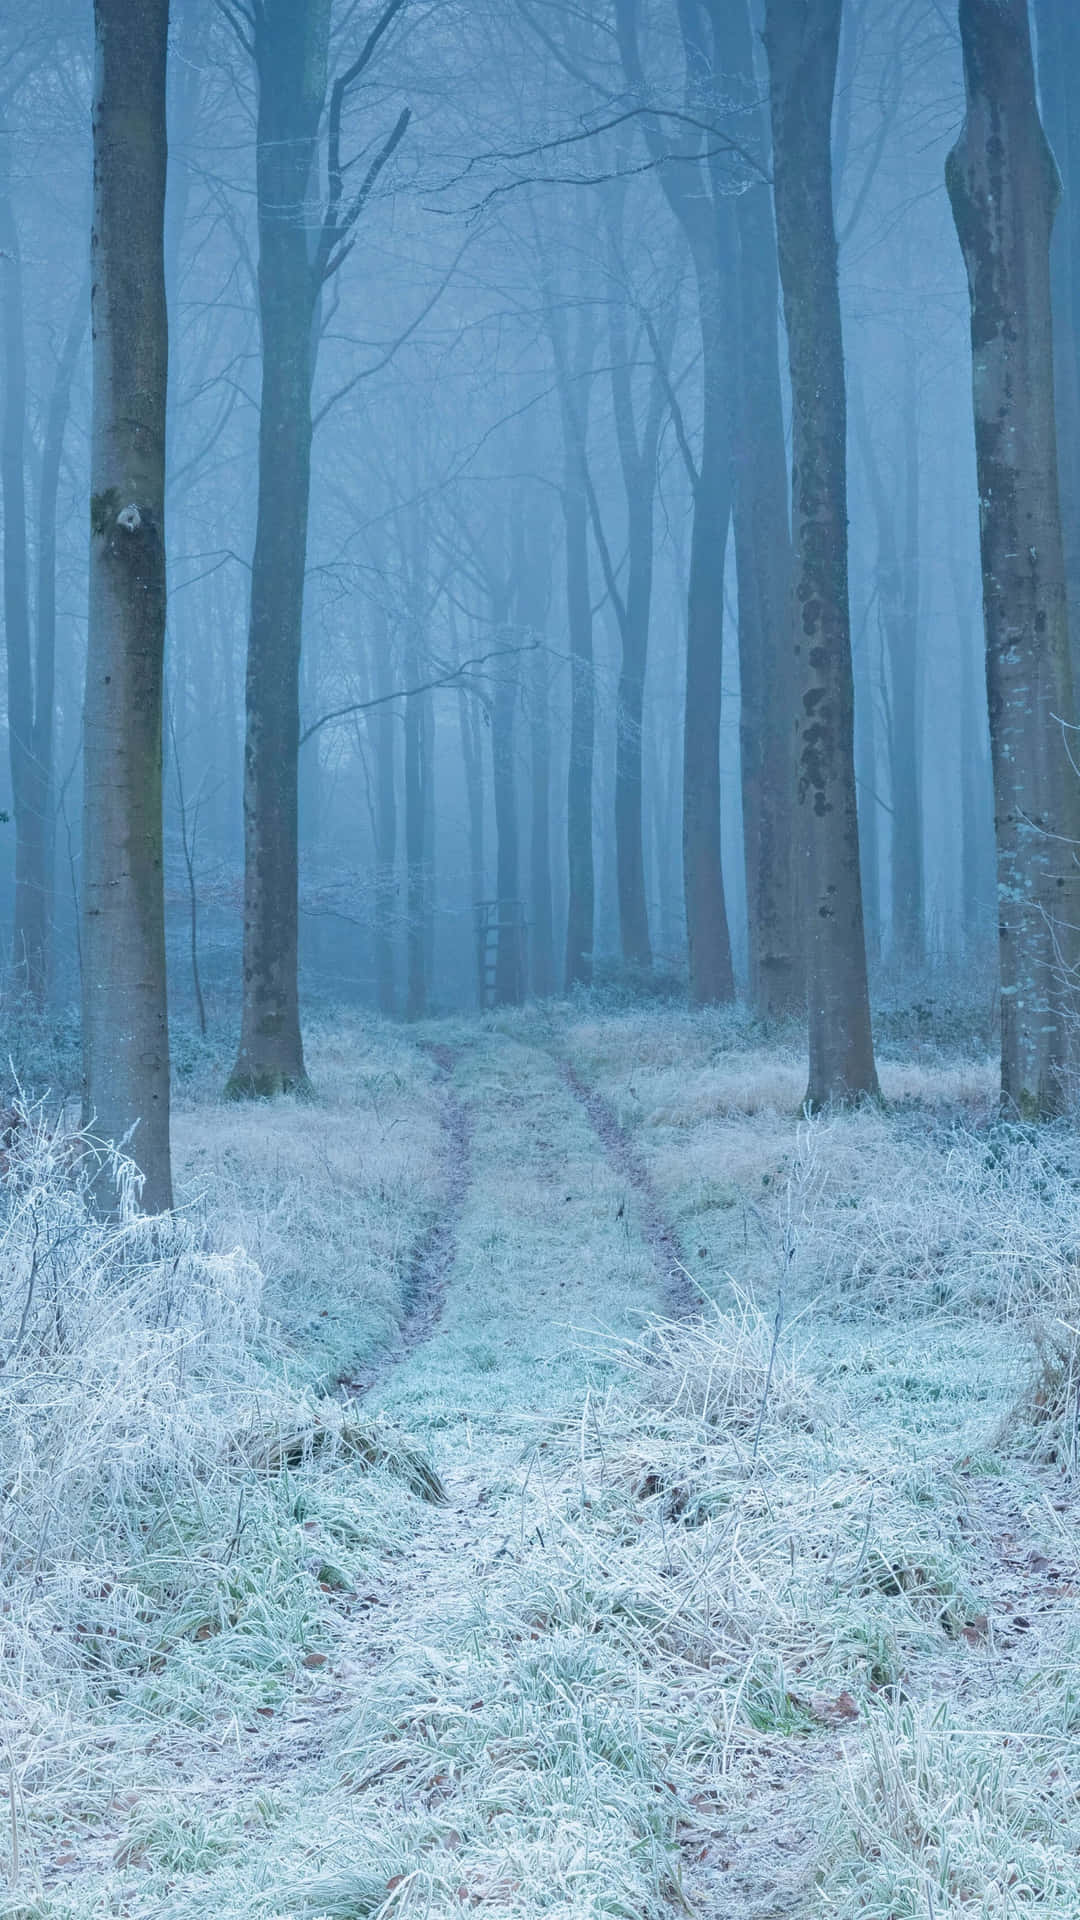 "Take a break, and explore the beauty of a Winter Forest"